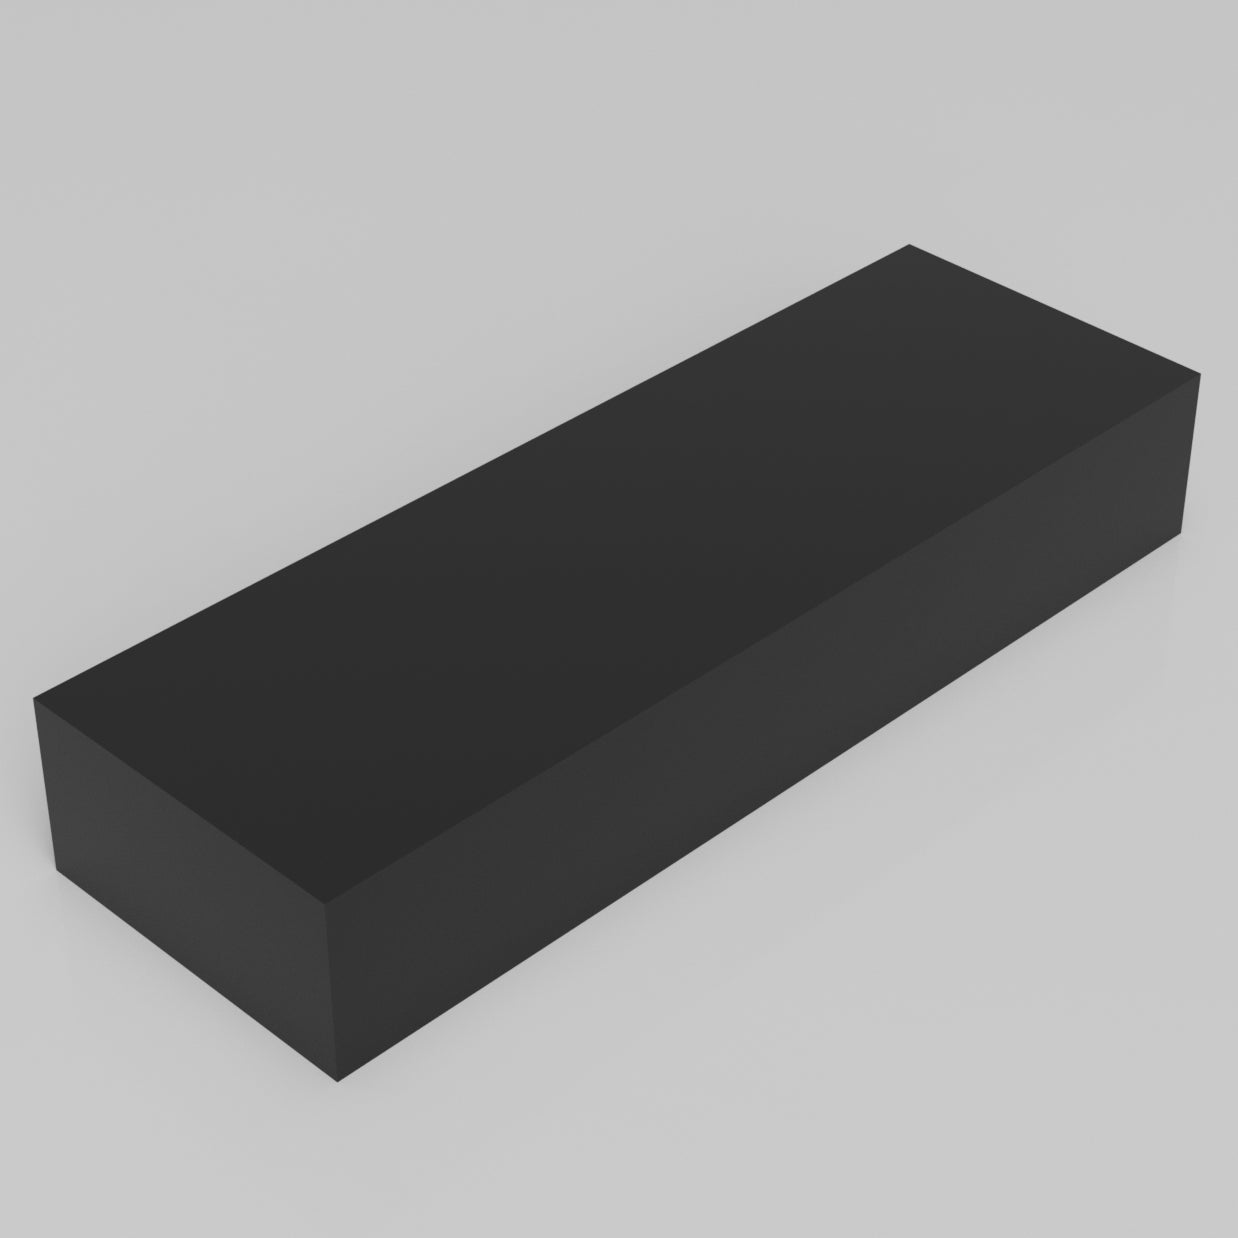 Machinable Wax Rectangular Block Front View 1 Inch by 2 Inch by 6 Inch